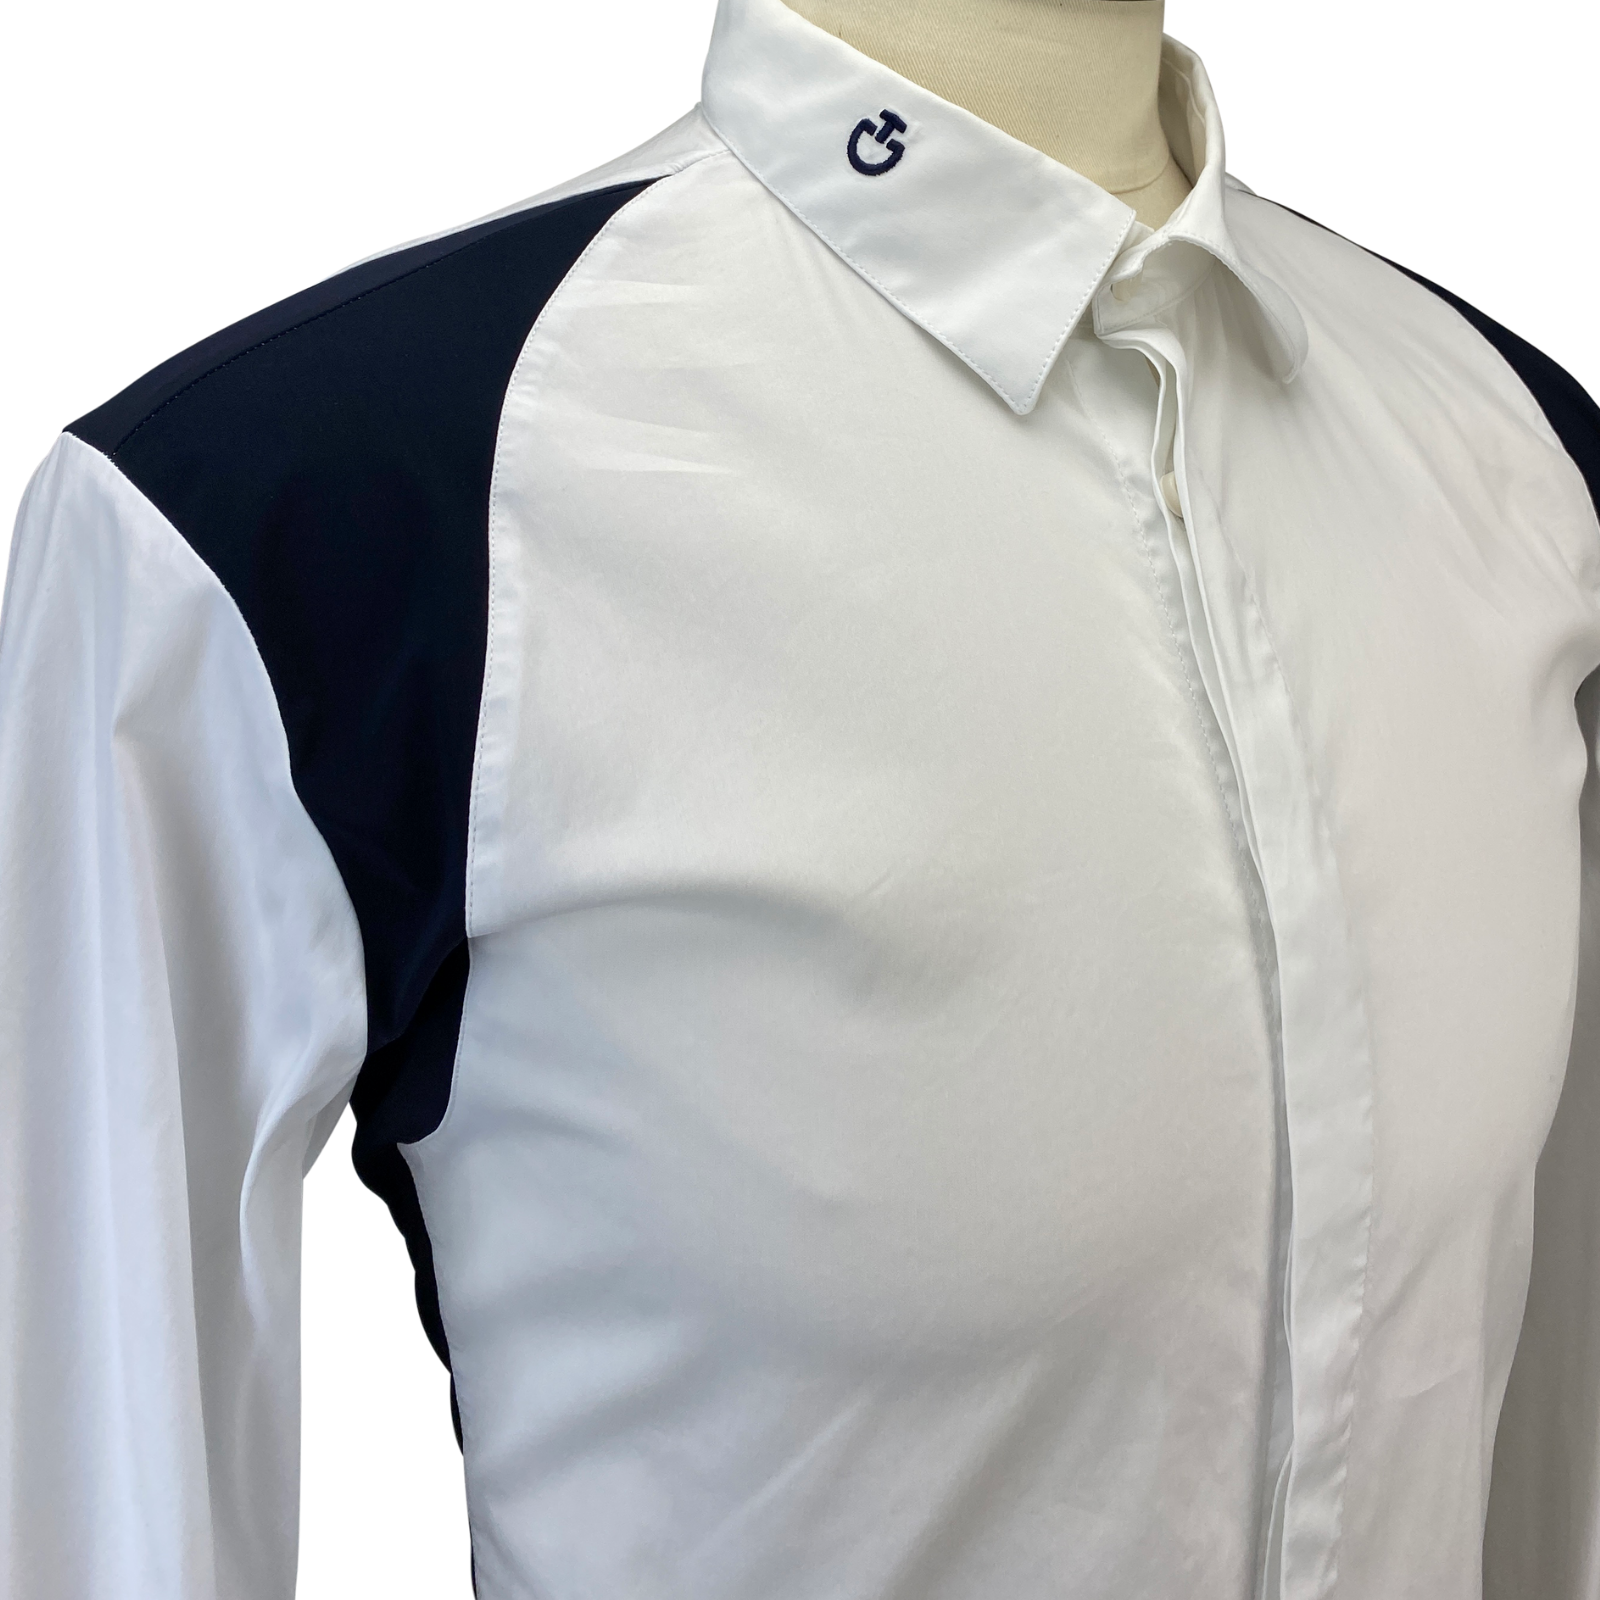 Detail of Cavalleria Toscana Button-Down Long Sleeve Shirt in White/Navy Accents